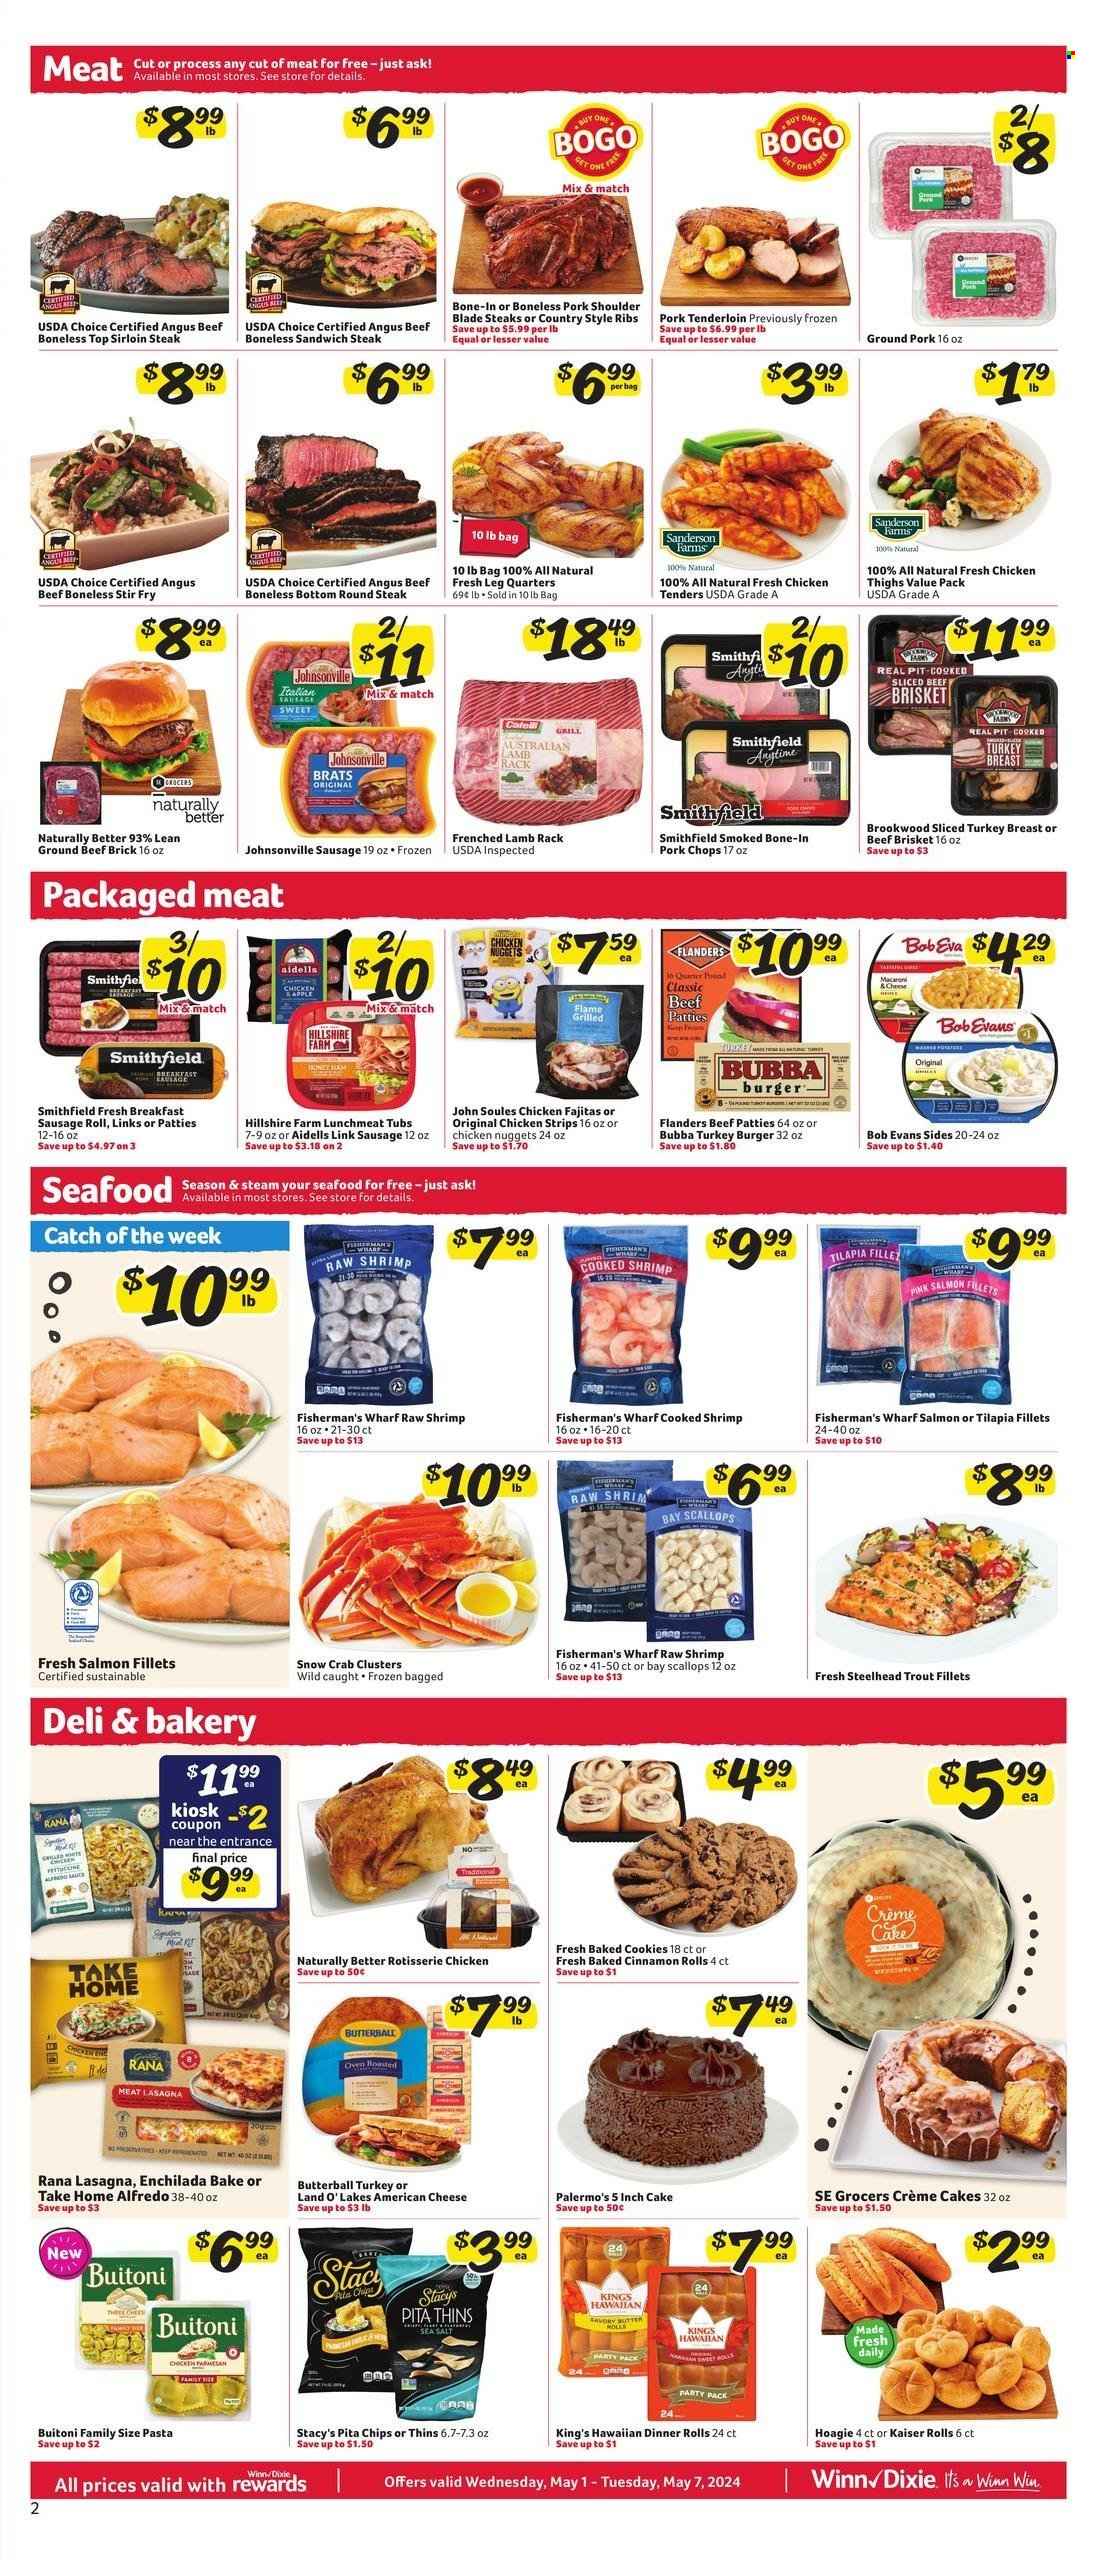 thumbnail - Winn Dixie Flyer - 05/01/2024 - 05/07/2024 - Sales products - chips, Thins, pita chips, enchiladas, lasagna meal, Rana, Butterball, american cheese, cheese, cake, pasta, Buitoni, steak, ribs, pork meat, pork ribs, pork shoulder, country style ribs, beef sirloin, beef steak, sirloin steak, pork tenderloin, ground pork, beef meat, smoked pork, pork chops, sausage rolls, sausage patties, Hillshire Farm, sausage, lunch meat, hamburger, burger patties, turkey burger, round steak, chicken tenders, chicken thighs, chicken, ground beef, Johnsonville, lamb meat, rack of lamb, fajita, chicken strips, strips, Bob Evans, ready meal, brisket, sliced turkey, turkey breast, sliced meat, turkey, beef brisket, seafood, shrimps, chicken roast, fish fillets, salmon, salmon fillet, crab, crab clusters, trout, cookies, cinnamon roll, kaiser roll, dinner rolls, tilapia. Page 5.